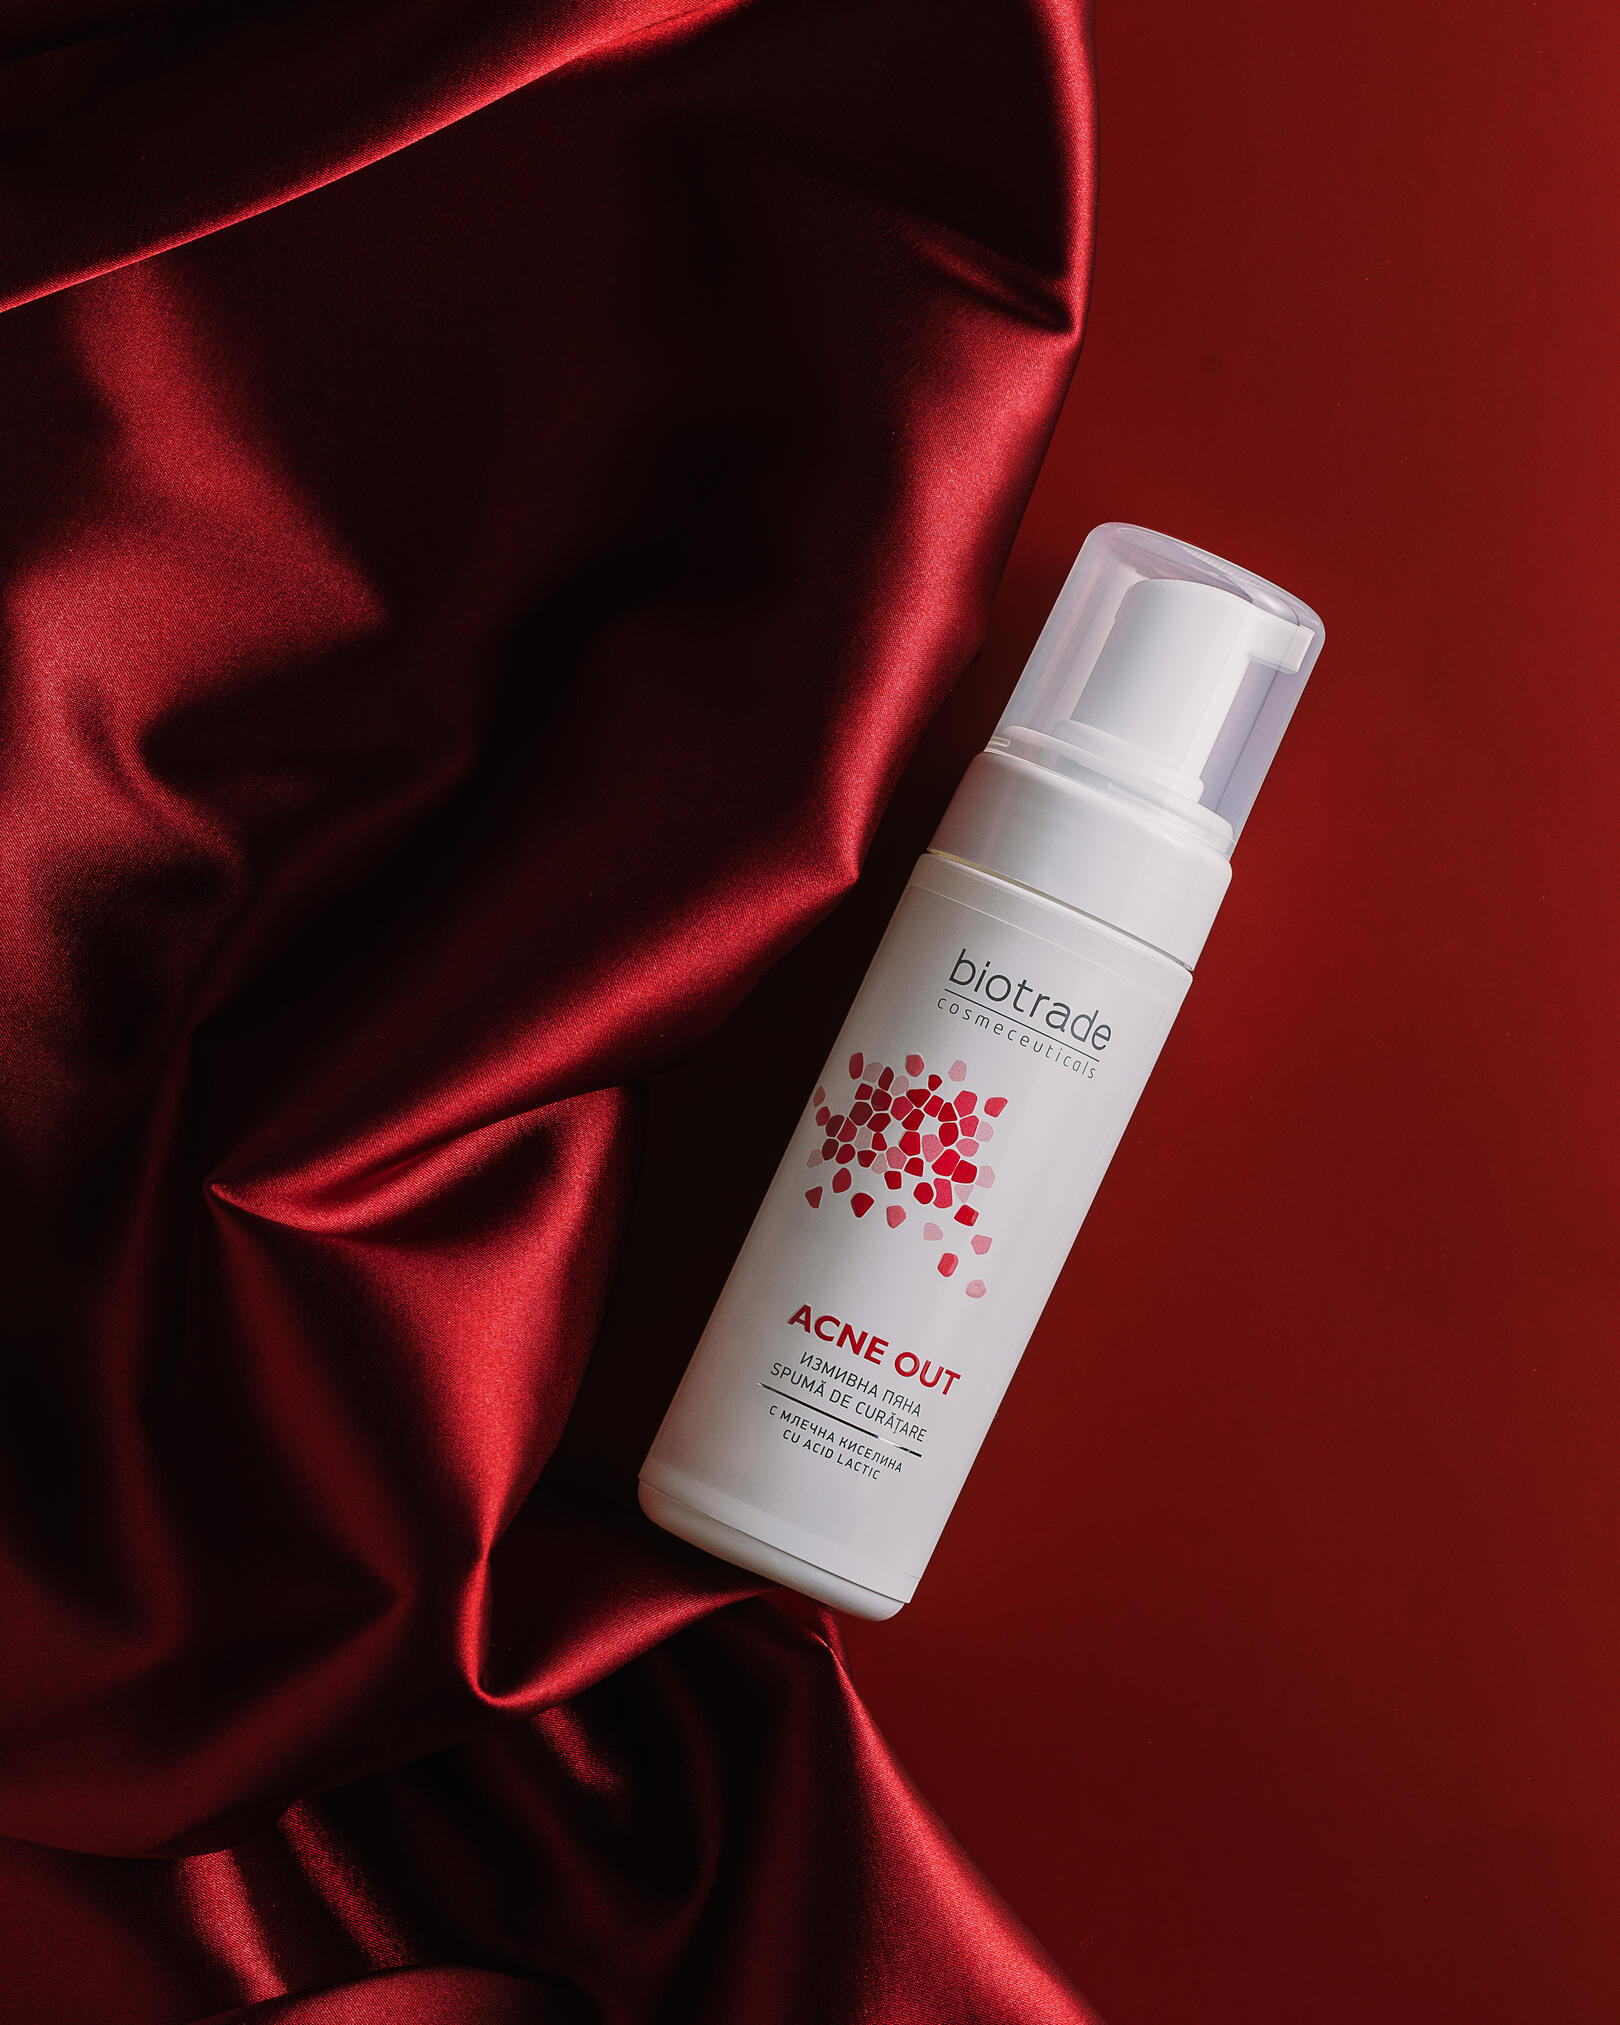  Biotrade Acne Out facial cleanser.  On a red background lies a jar of Biotrade Acne Out facial cleanser. To the left of it is a red fabric - repeating in its color - the color of the pattern on the packaging of the foam. The fabric is shimmery and shiny.